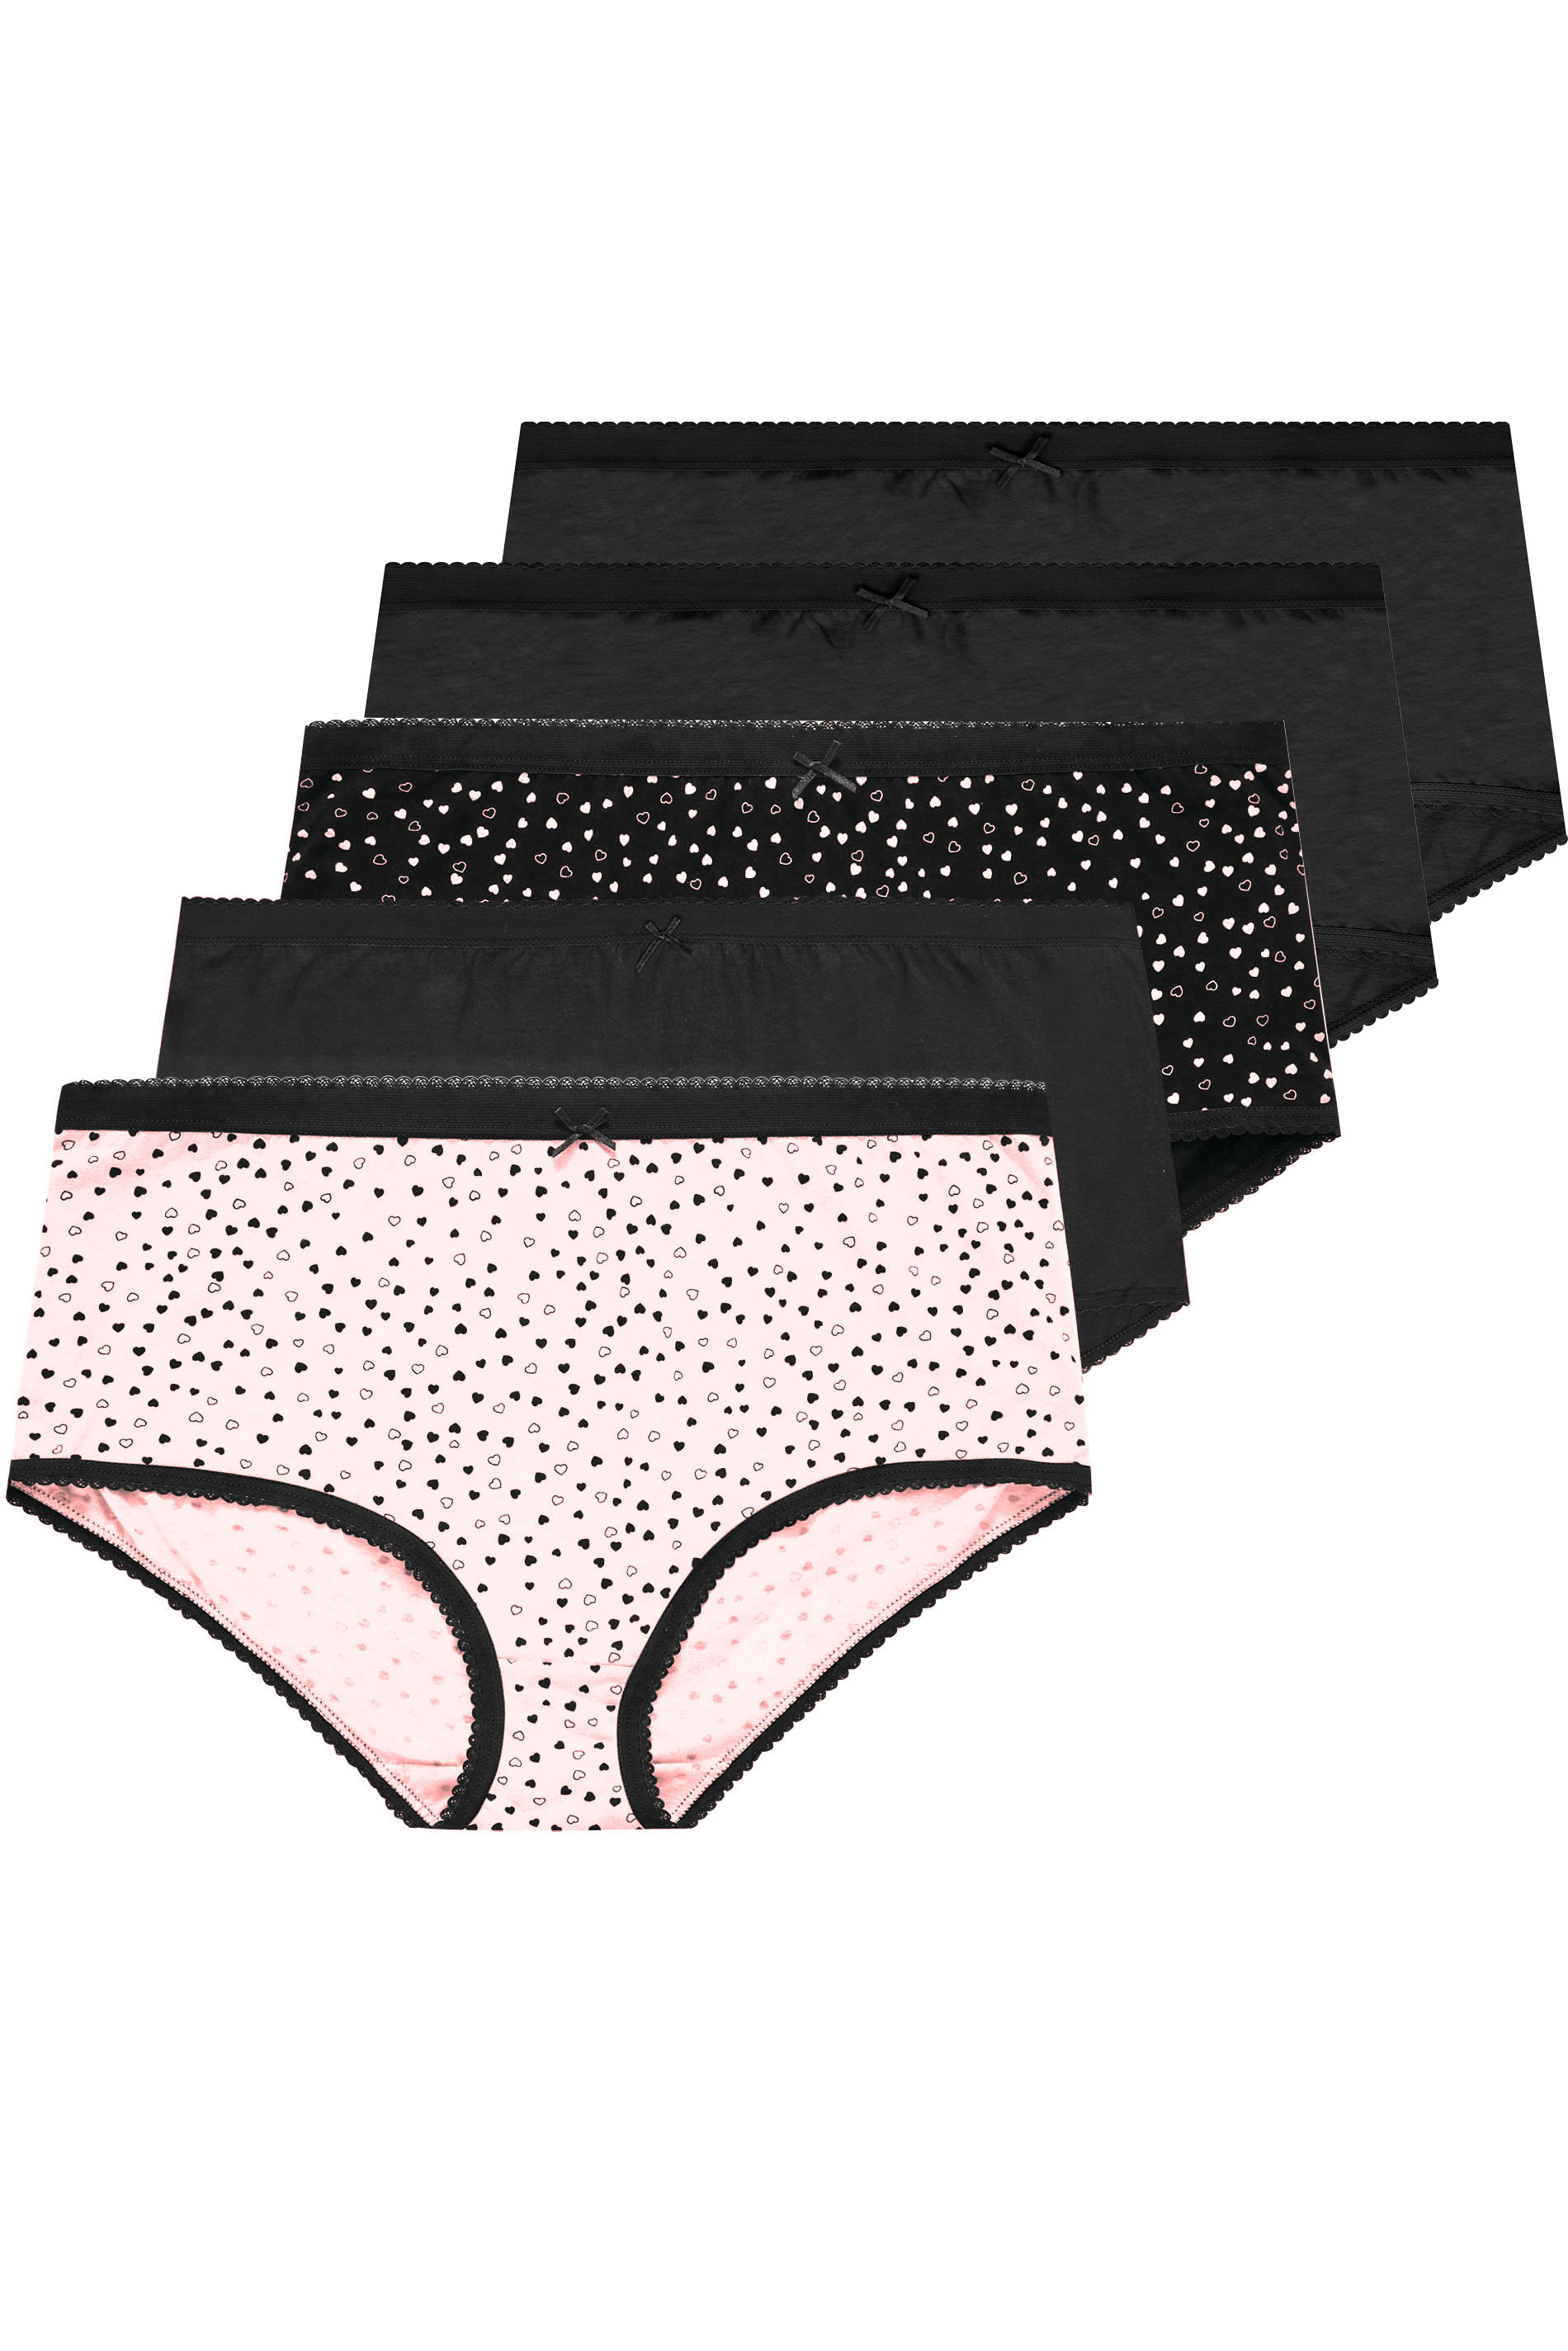 5 PACK Black & Pink Mini Heart Print Briefs | Yours Clothing